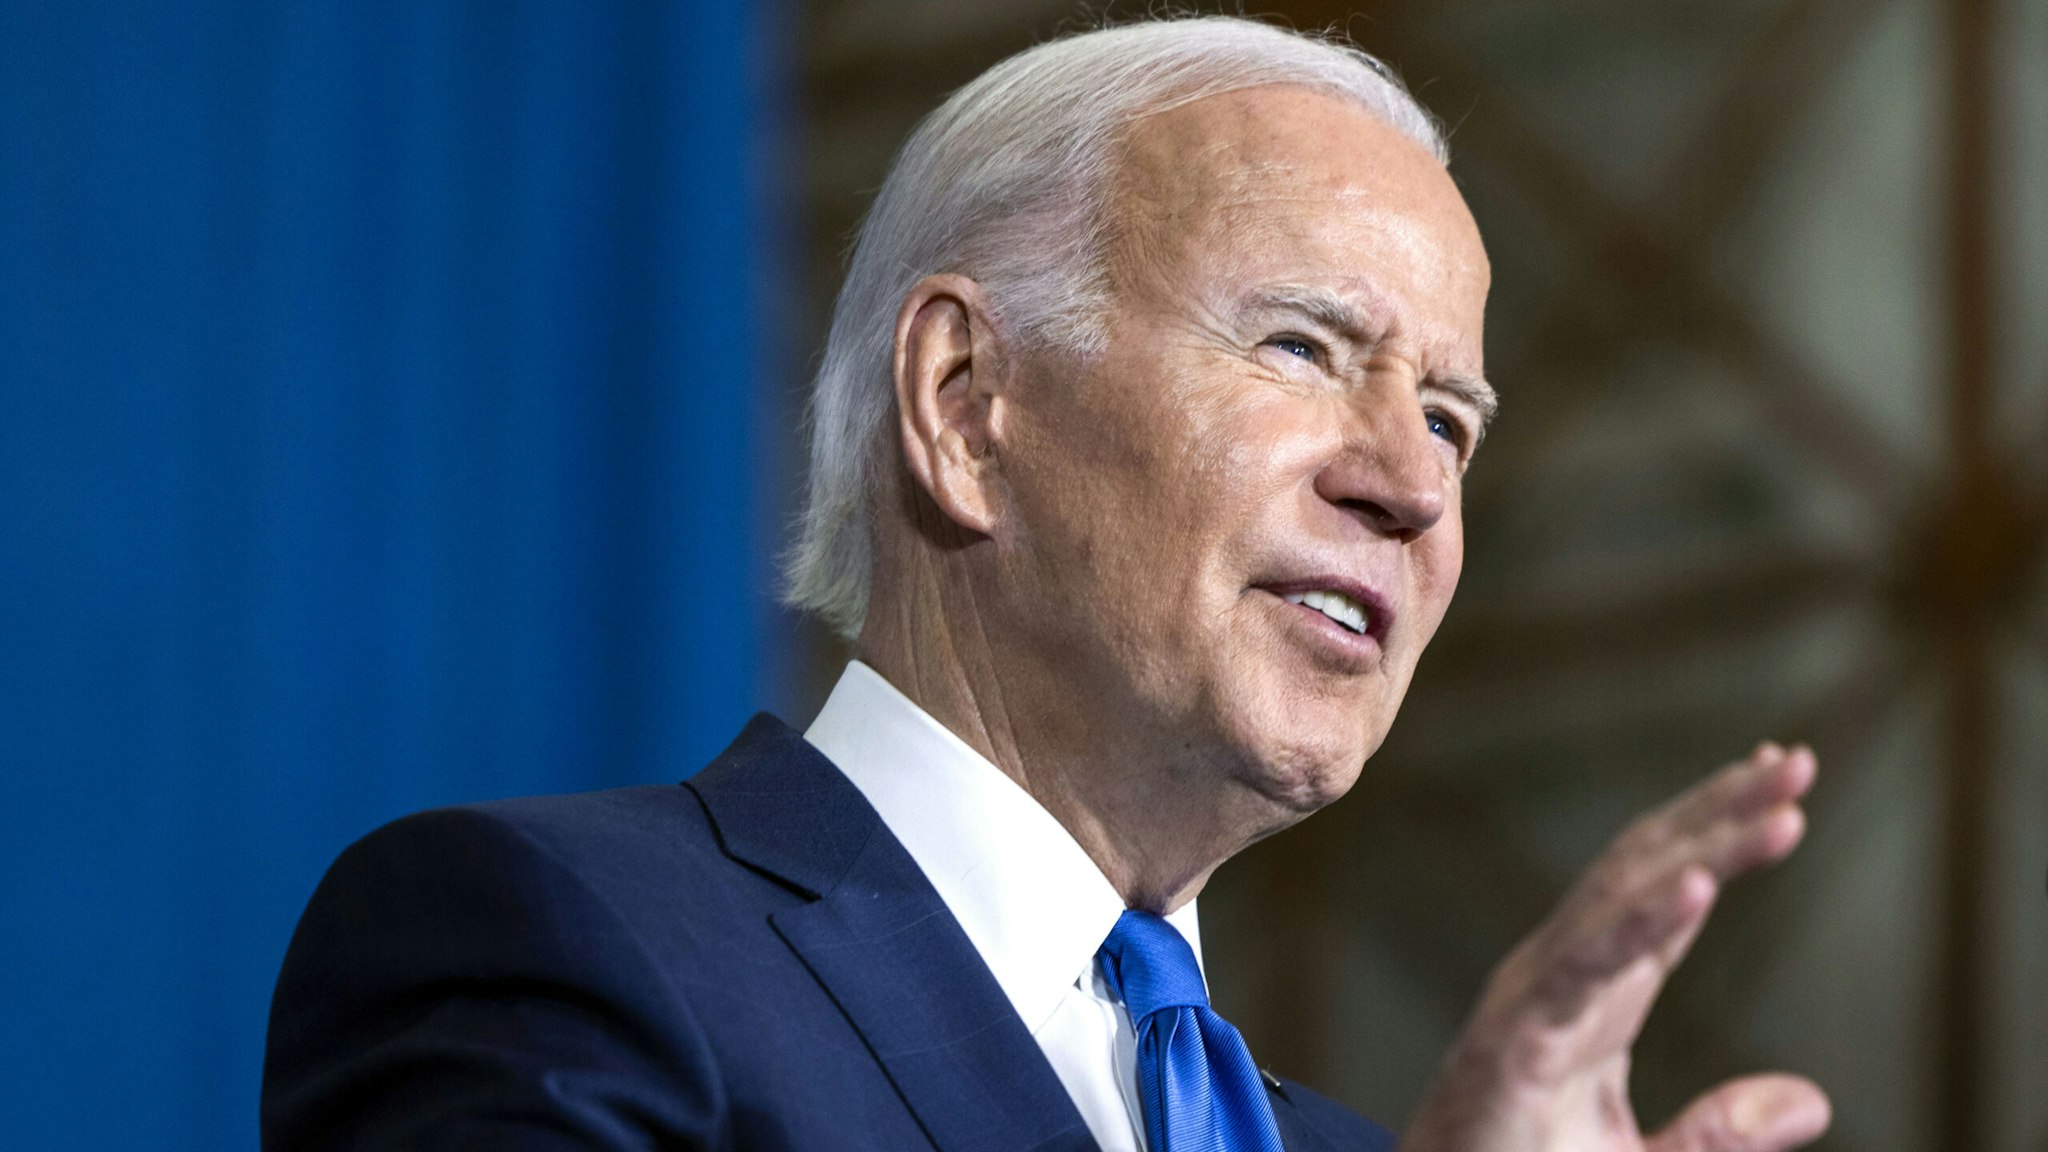 US President Joe Biden speaks at a Democratic National Committee event in Washington, DC, US, on Wednesday, Nov. 2, 2022. Biden issued a fresh warning about threats to US democracy less than a week before Election Day.